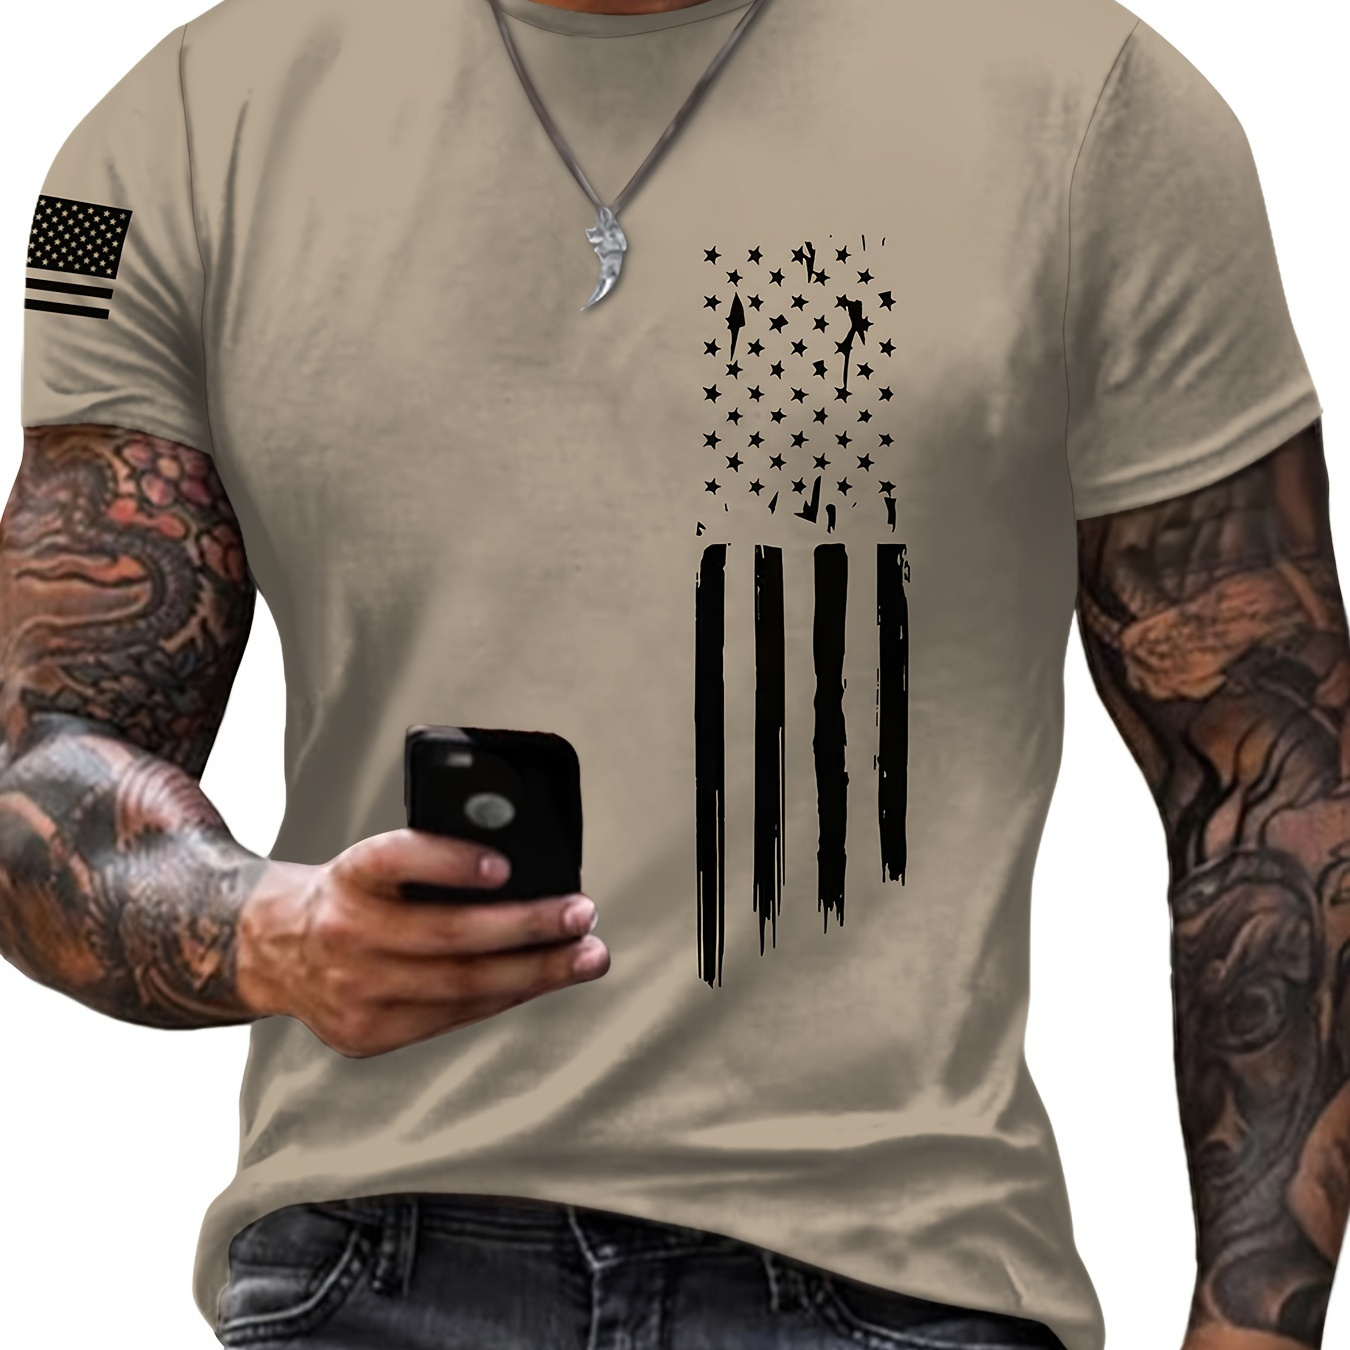 

Men's Trendy Casual Crew Neck Graphic T-shirt With Stylish Prints For Summer Daily Wear